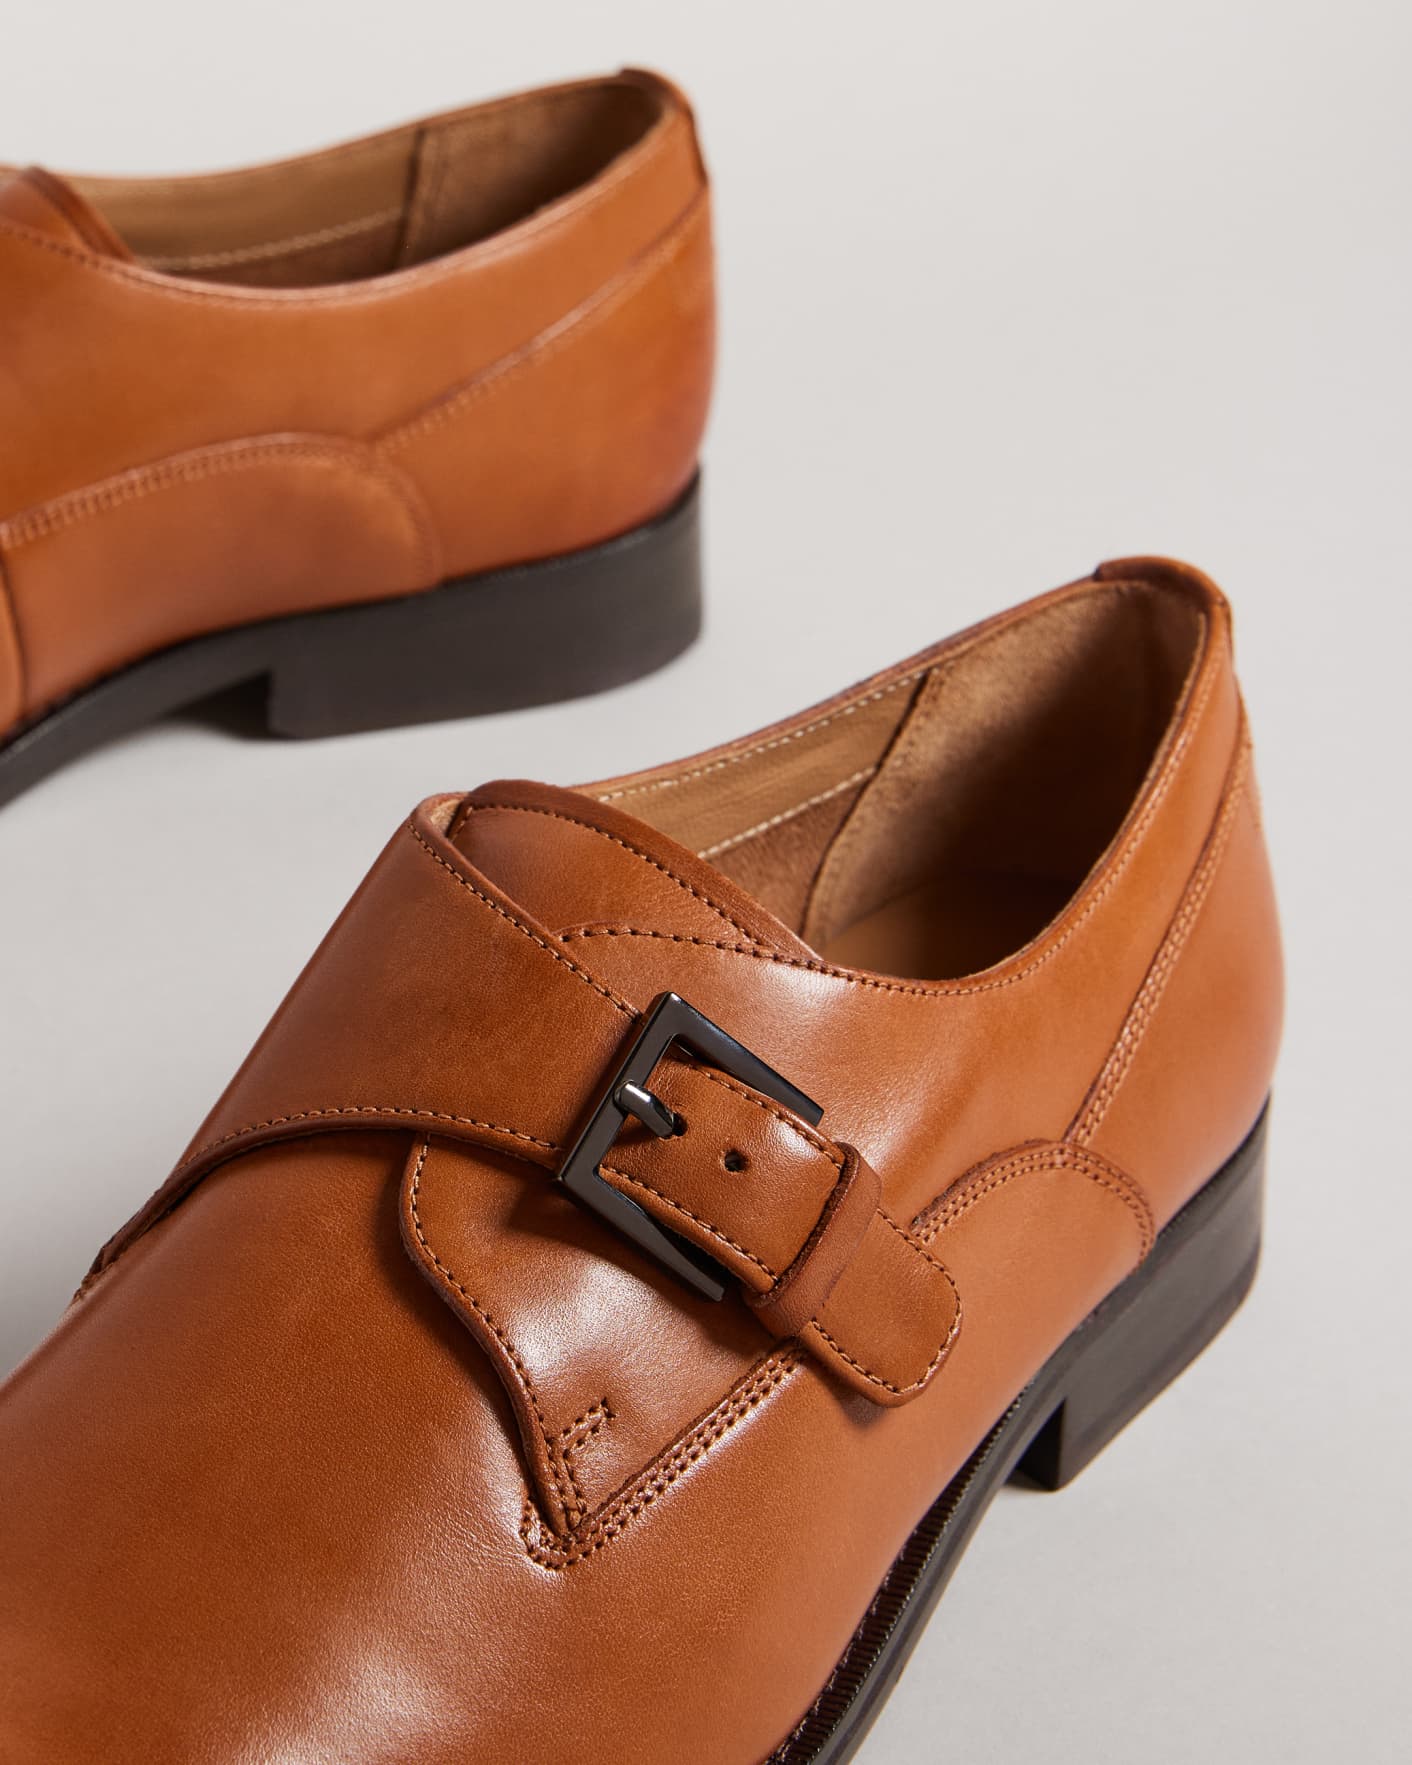 Tan Formal Leather Monk Shoes Ted Baker